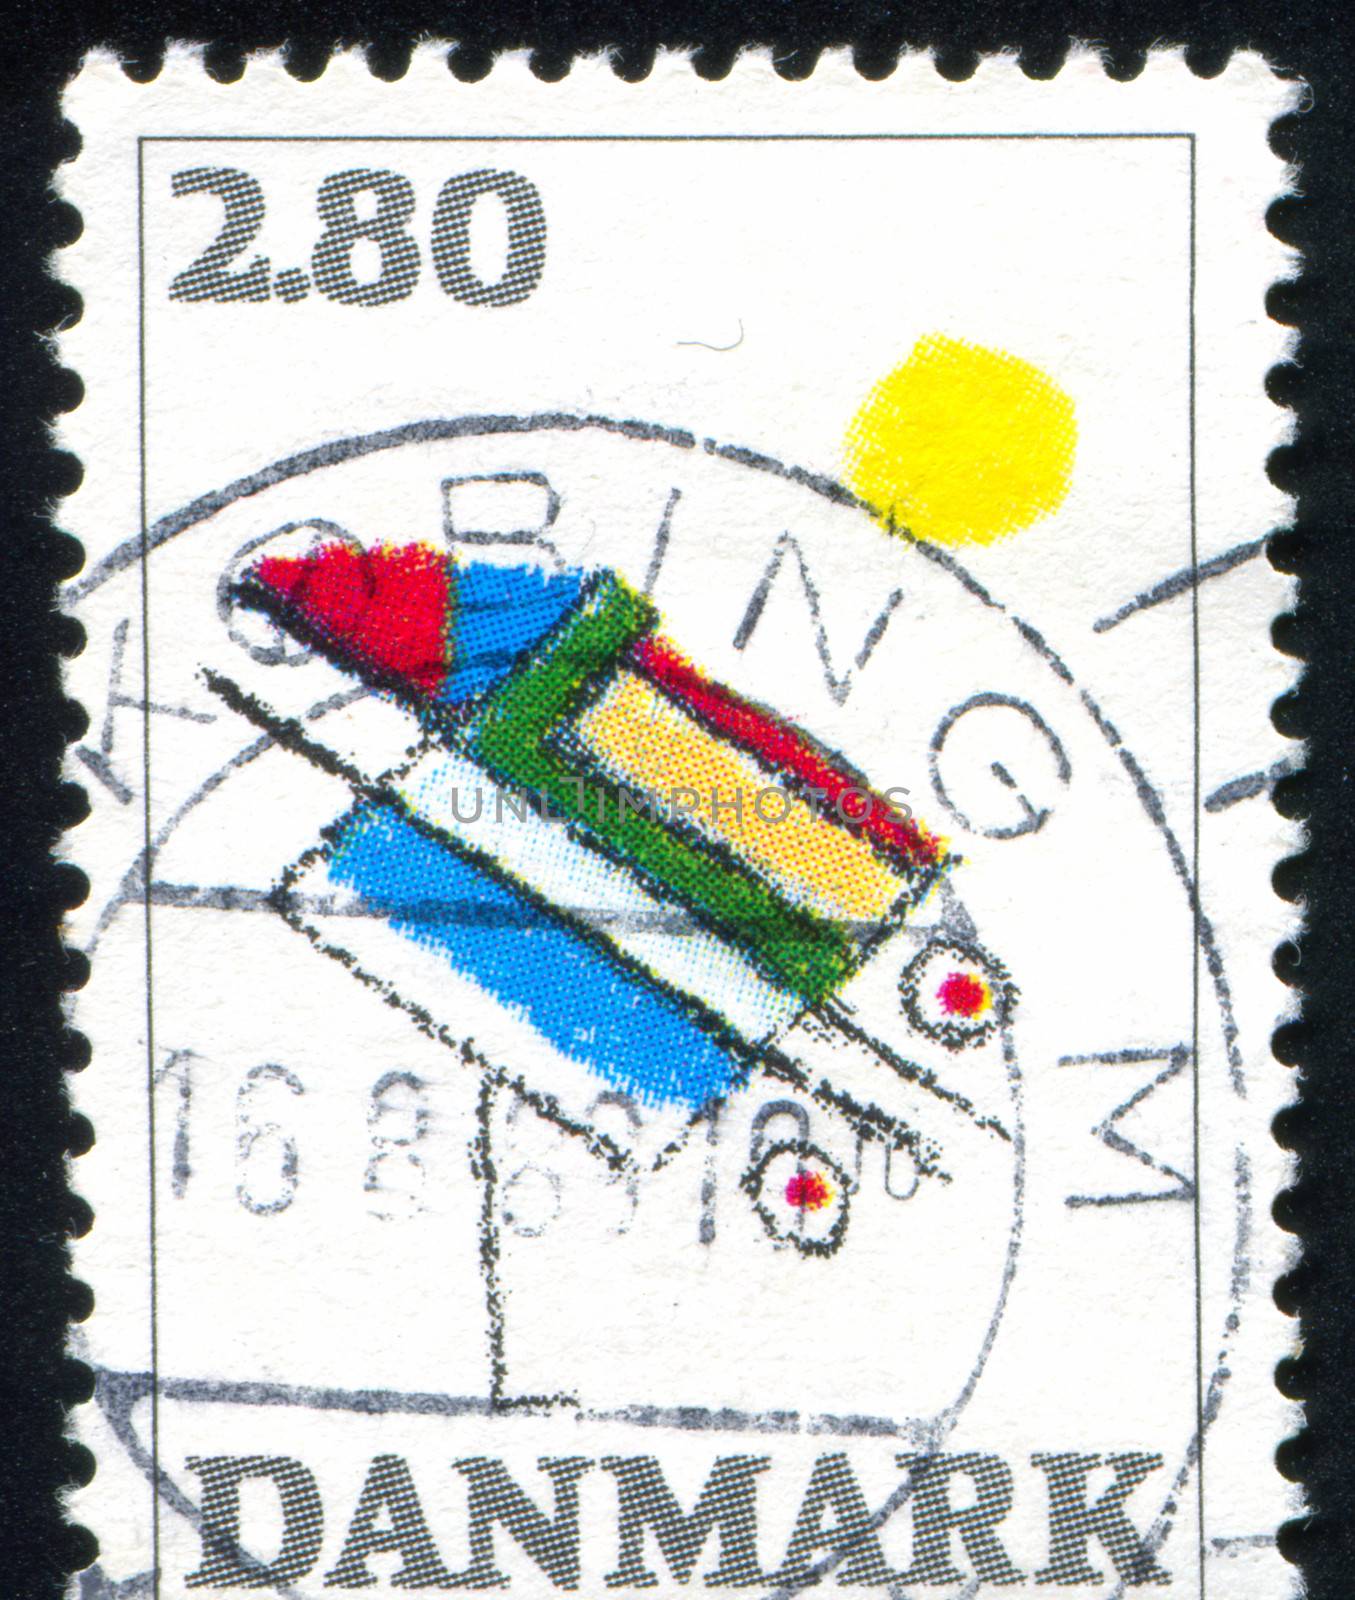 DENMARK - CIRCA 1987: stamp printed by Denmark, shows Abstact by Ejler Bille, circa 1987